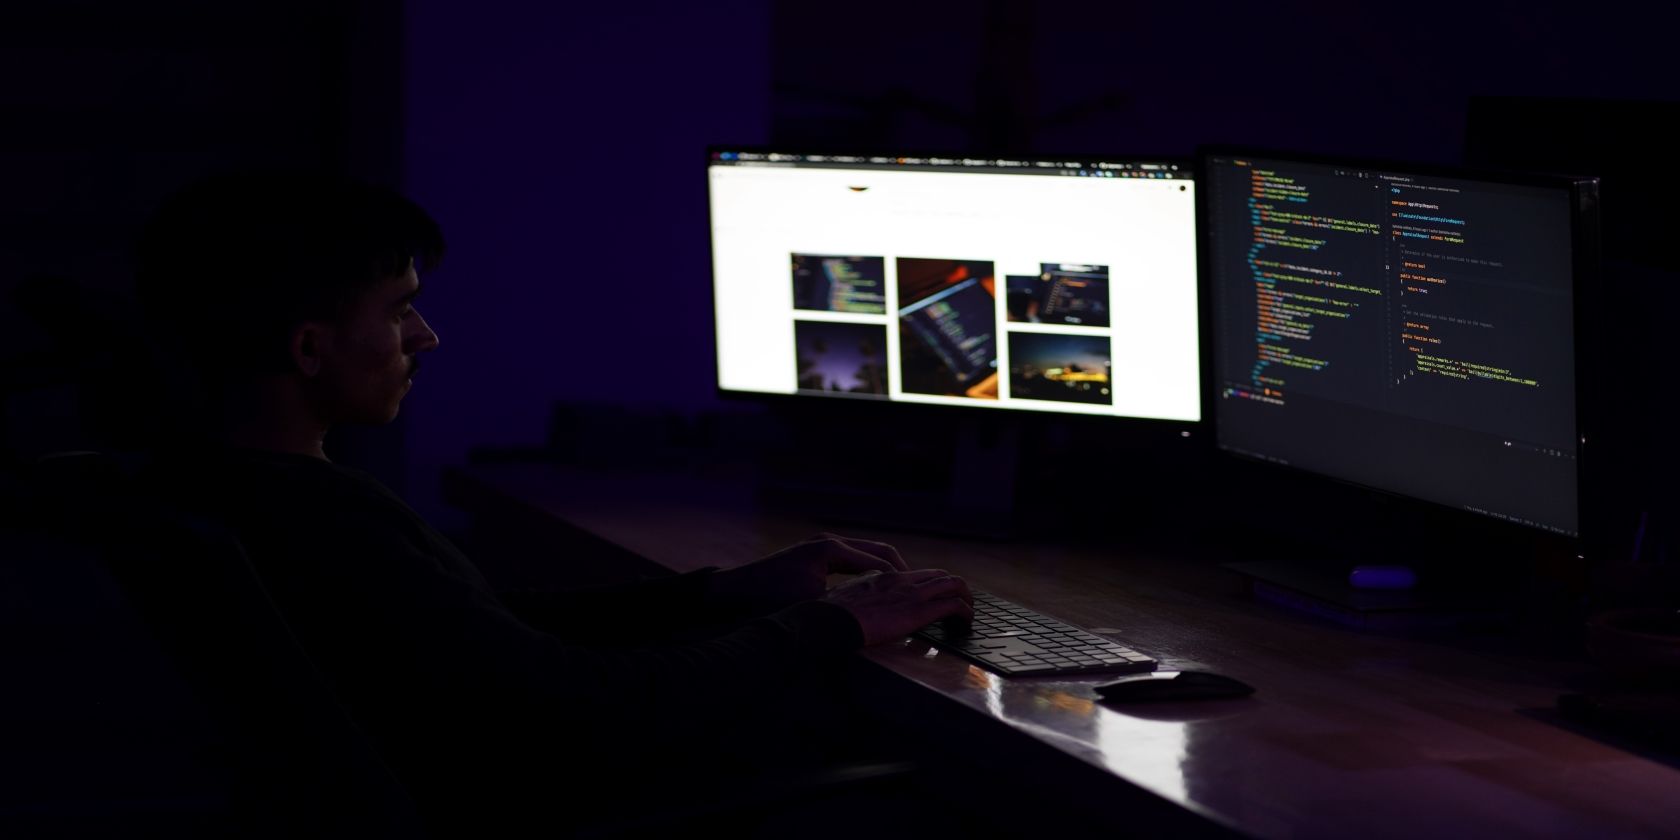 Somebody sitting at a desk, in a very dark room, in front of two screens, one showing a web page, the other showing code in a text editor.